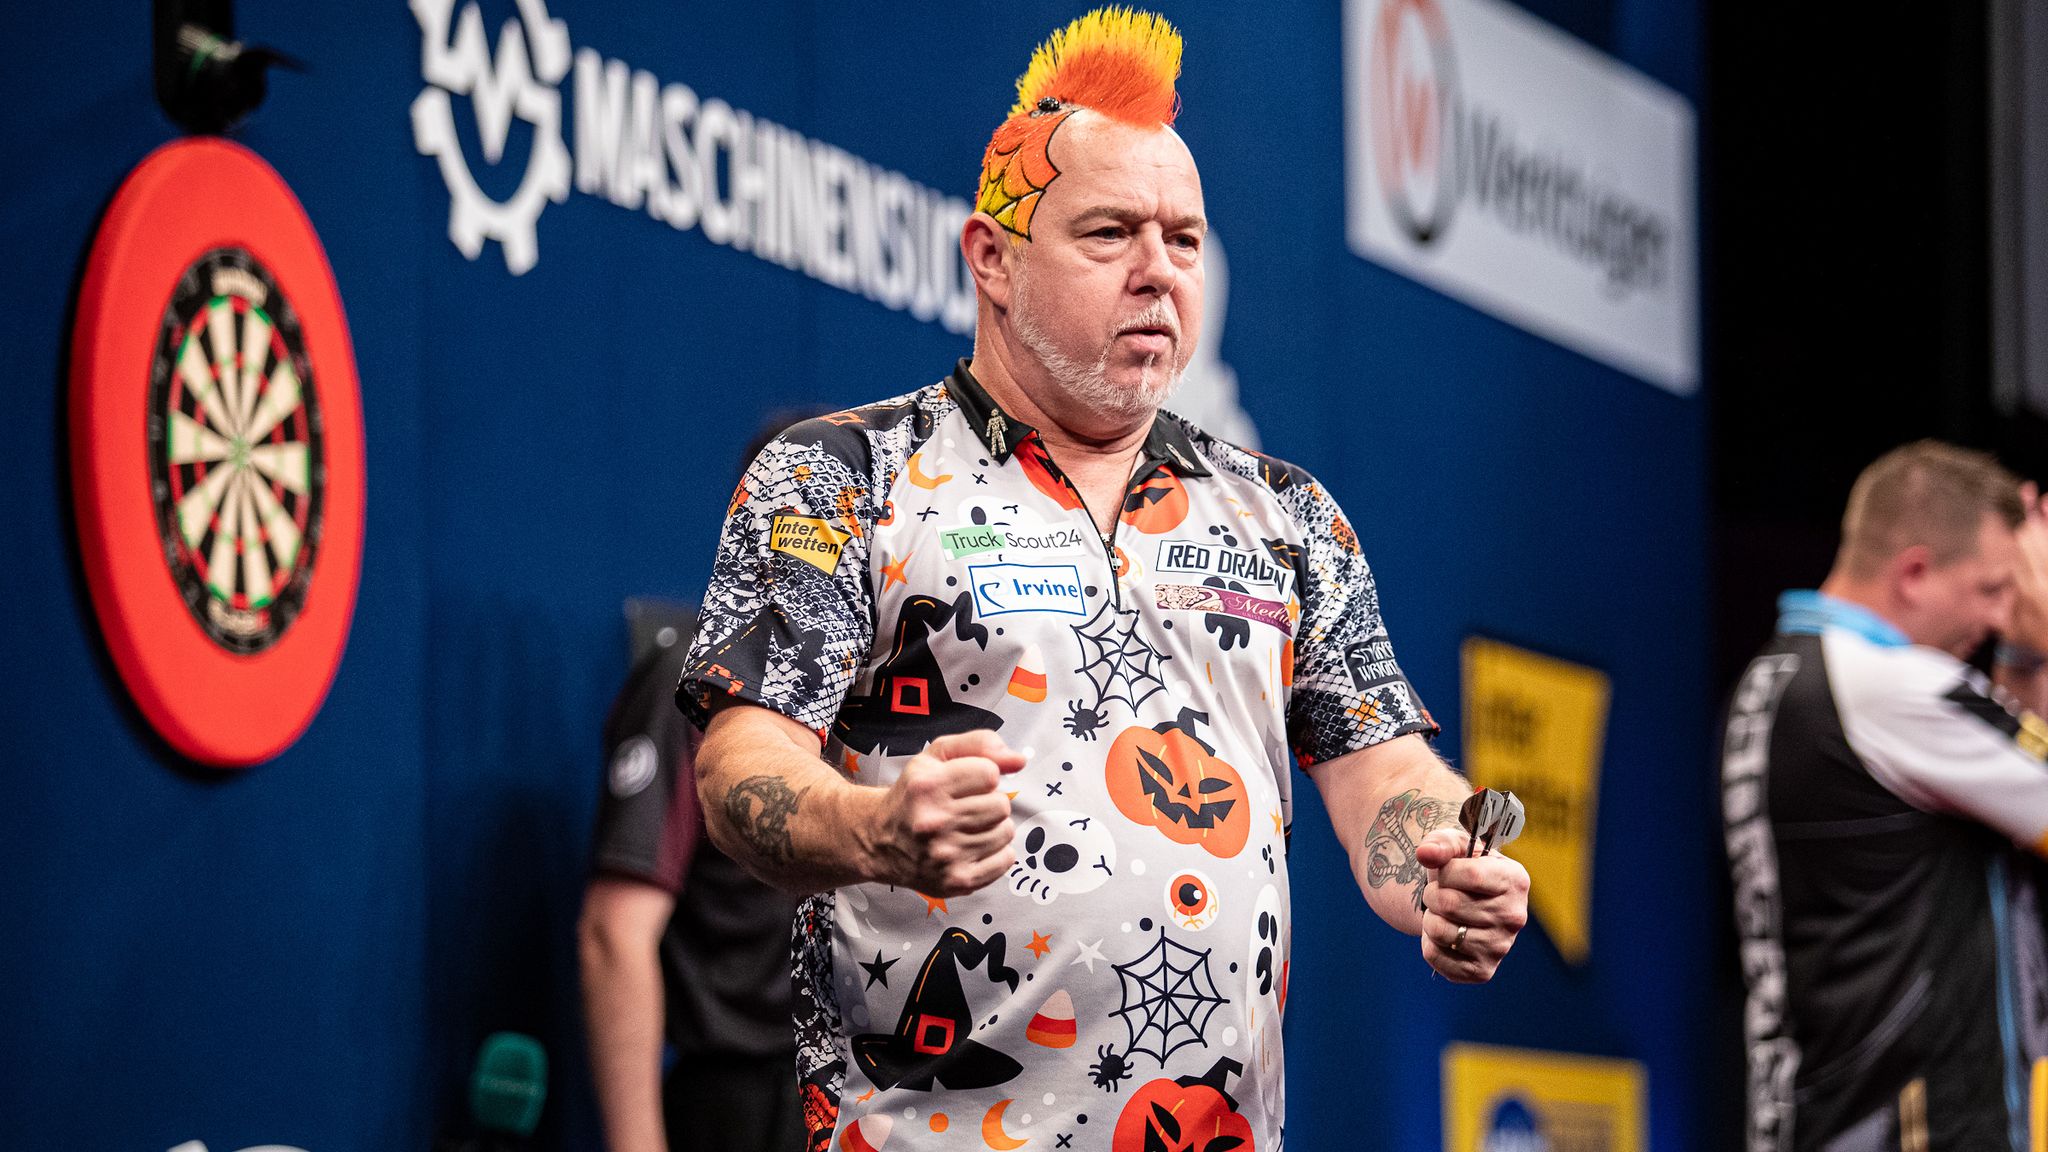 European Championship Peter Wright secures title with victory over James Wade in Dortmund Darts News Sky Sports